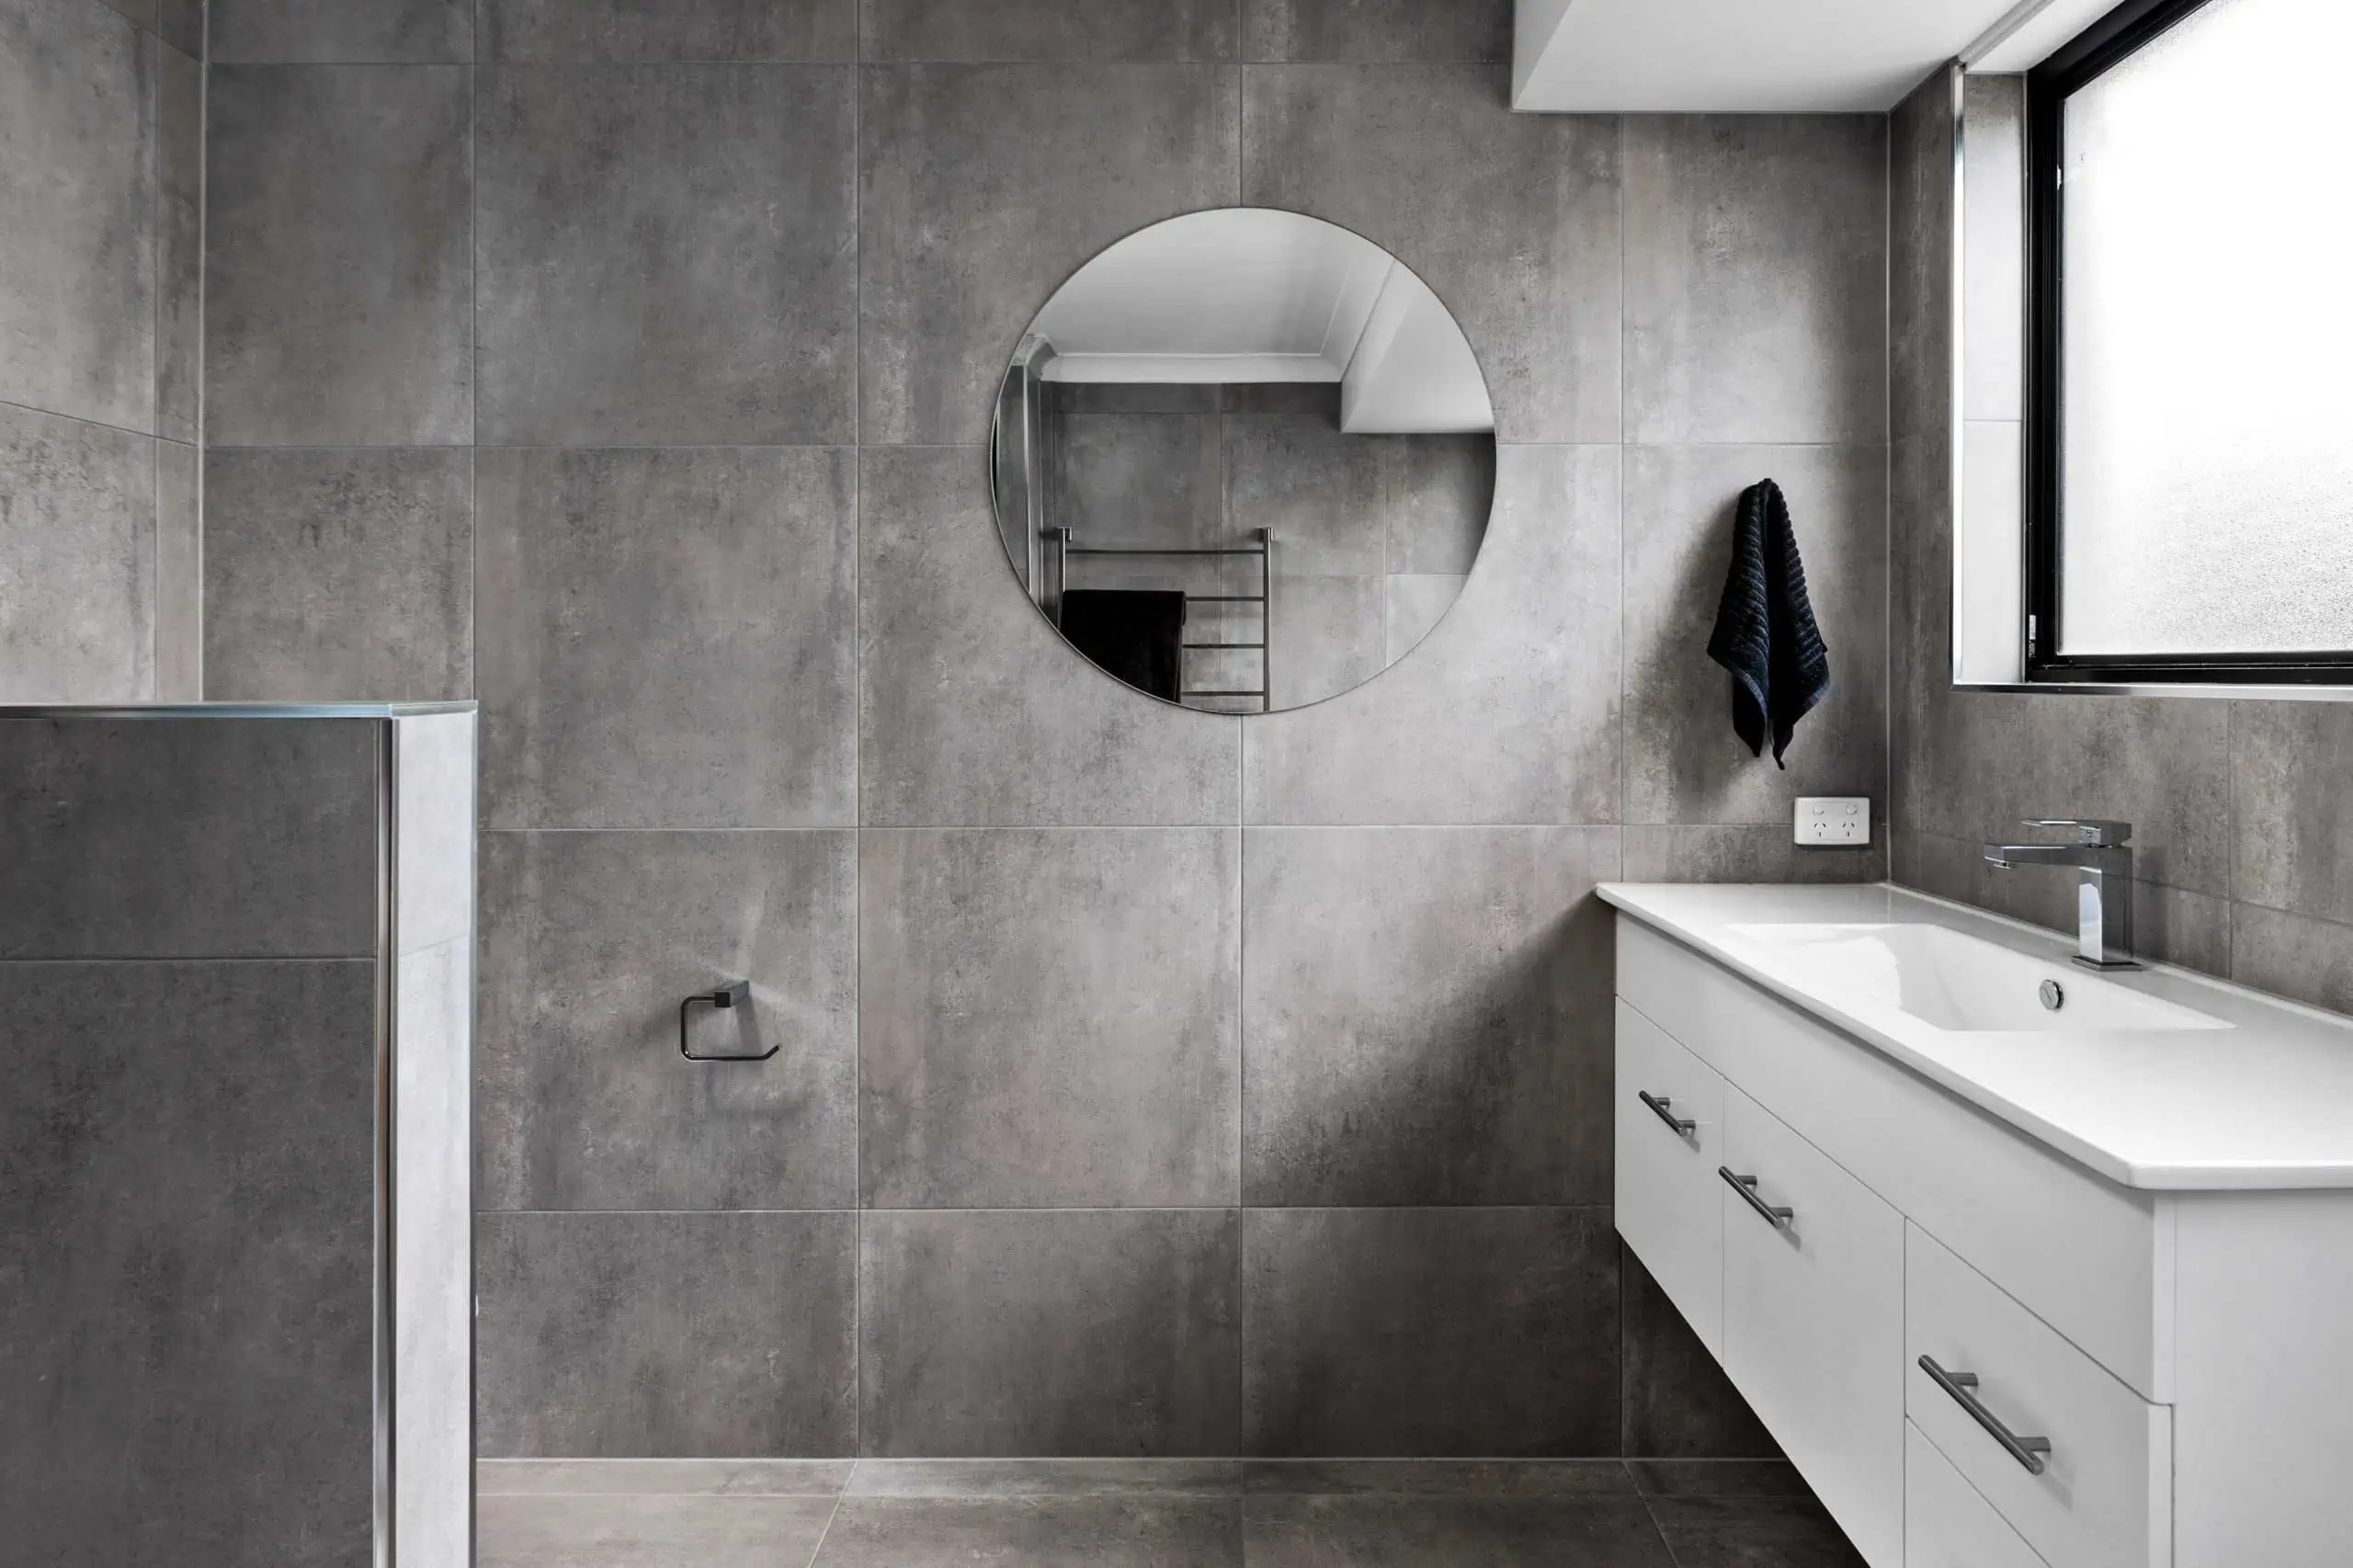 Modern bathroom design with a large round mirror and white vanity unit